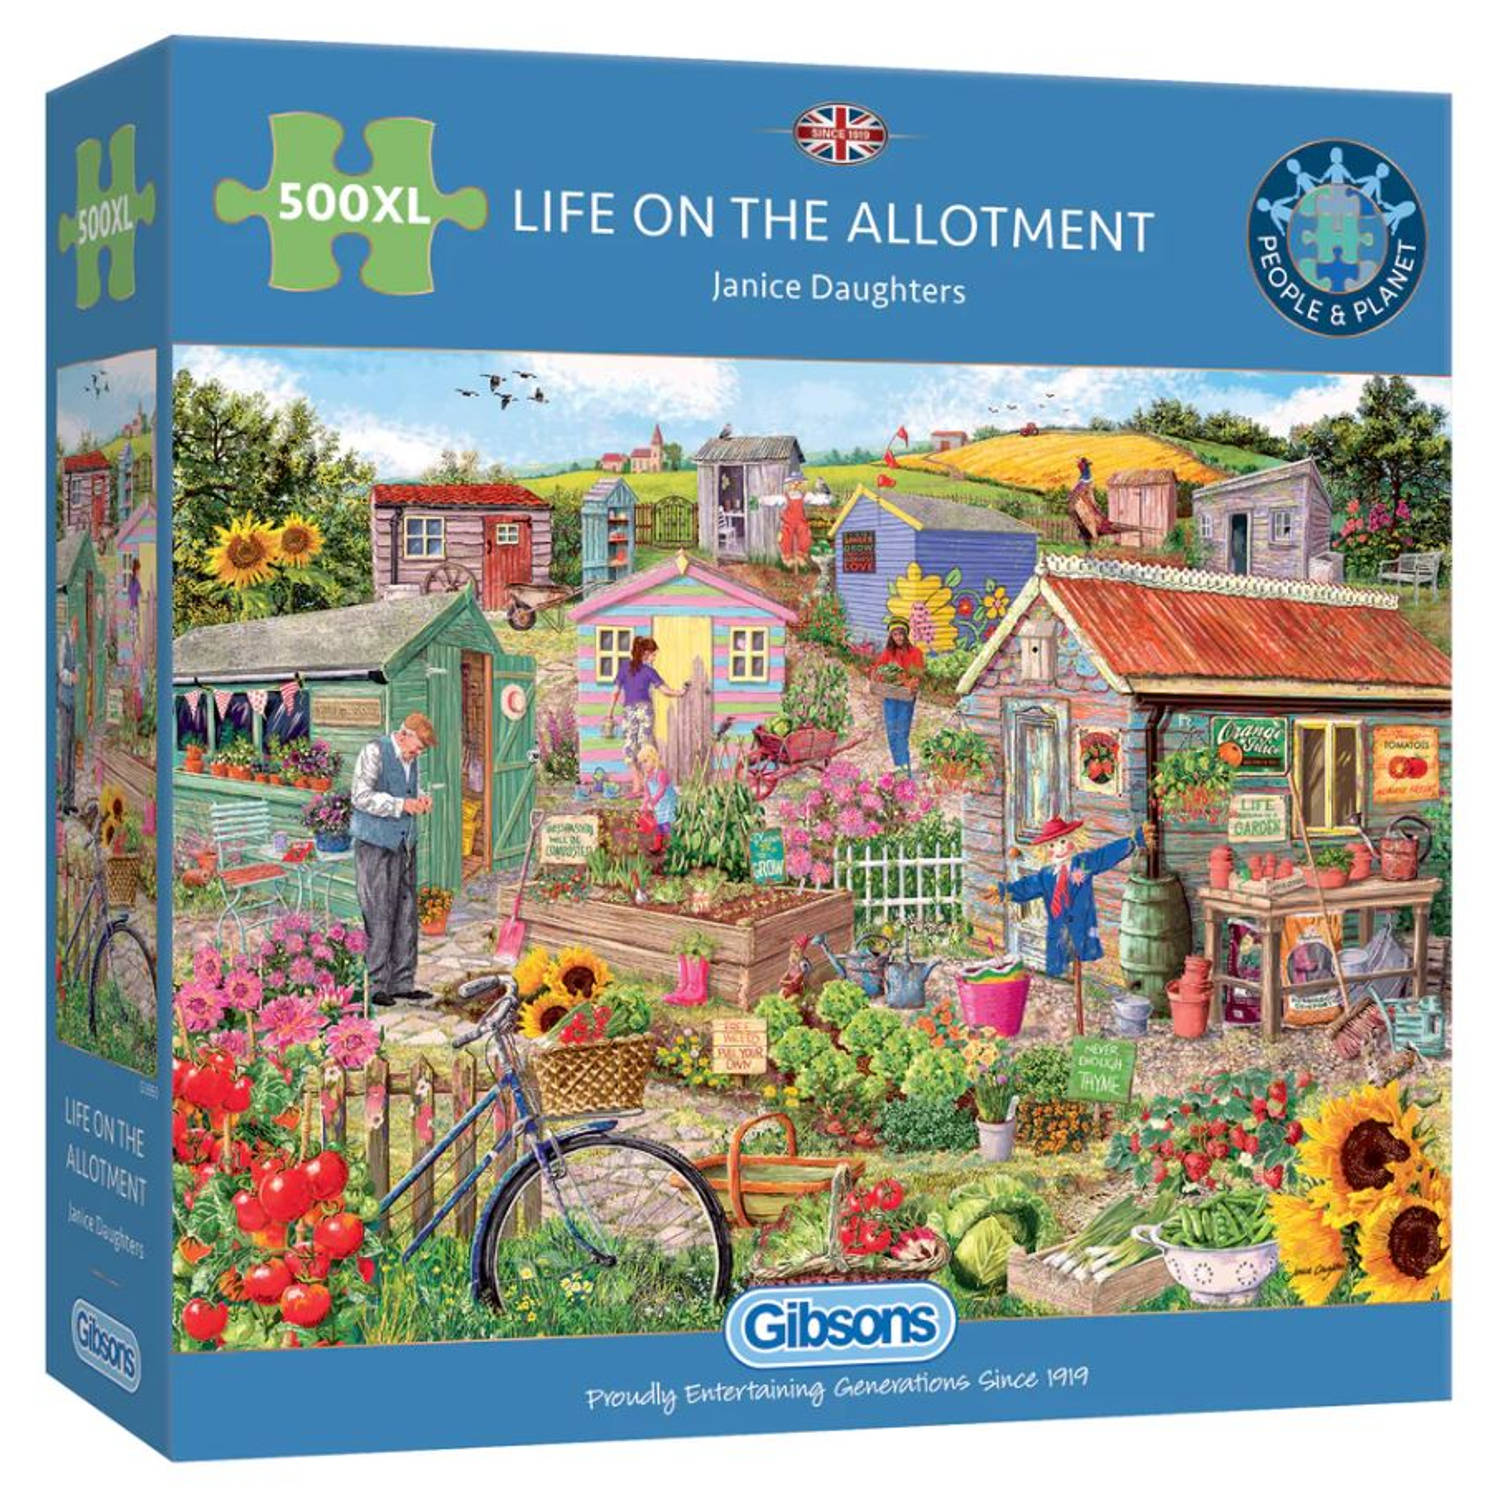 Gibsons Life on the Allotment (500XL) 4521179